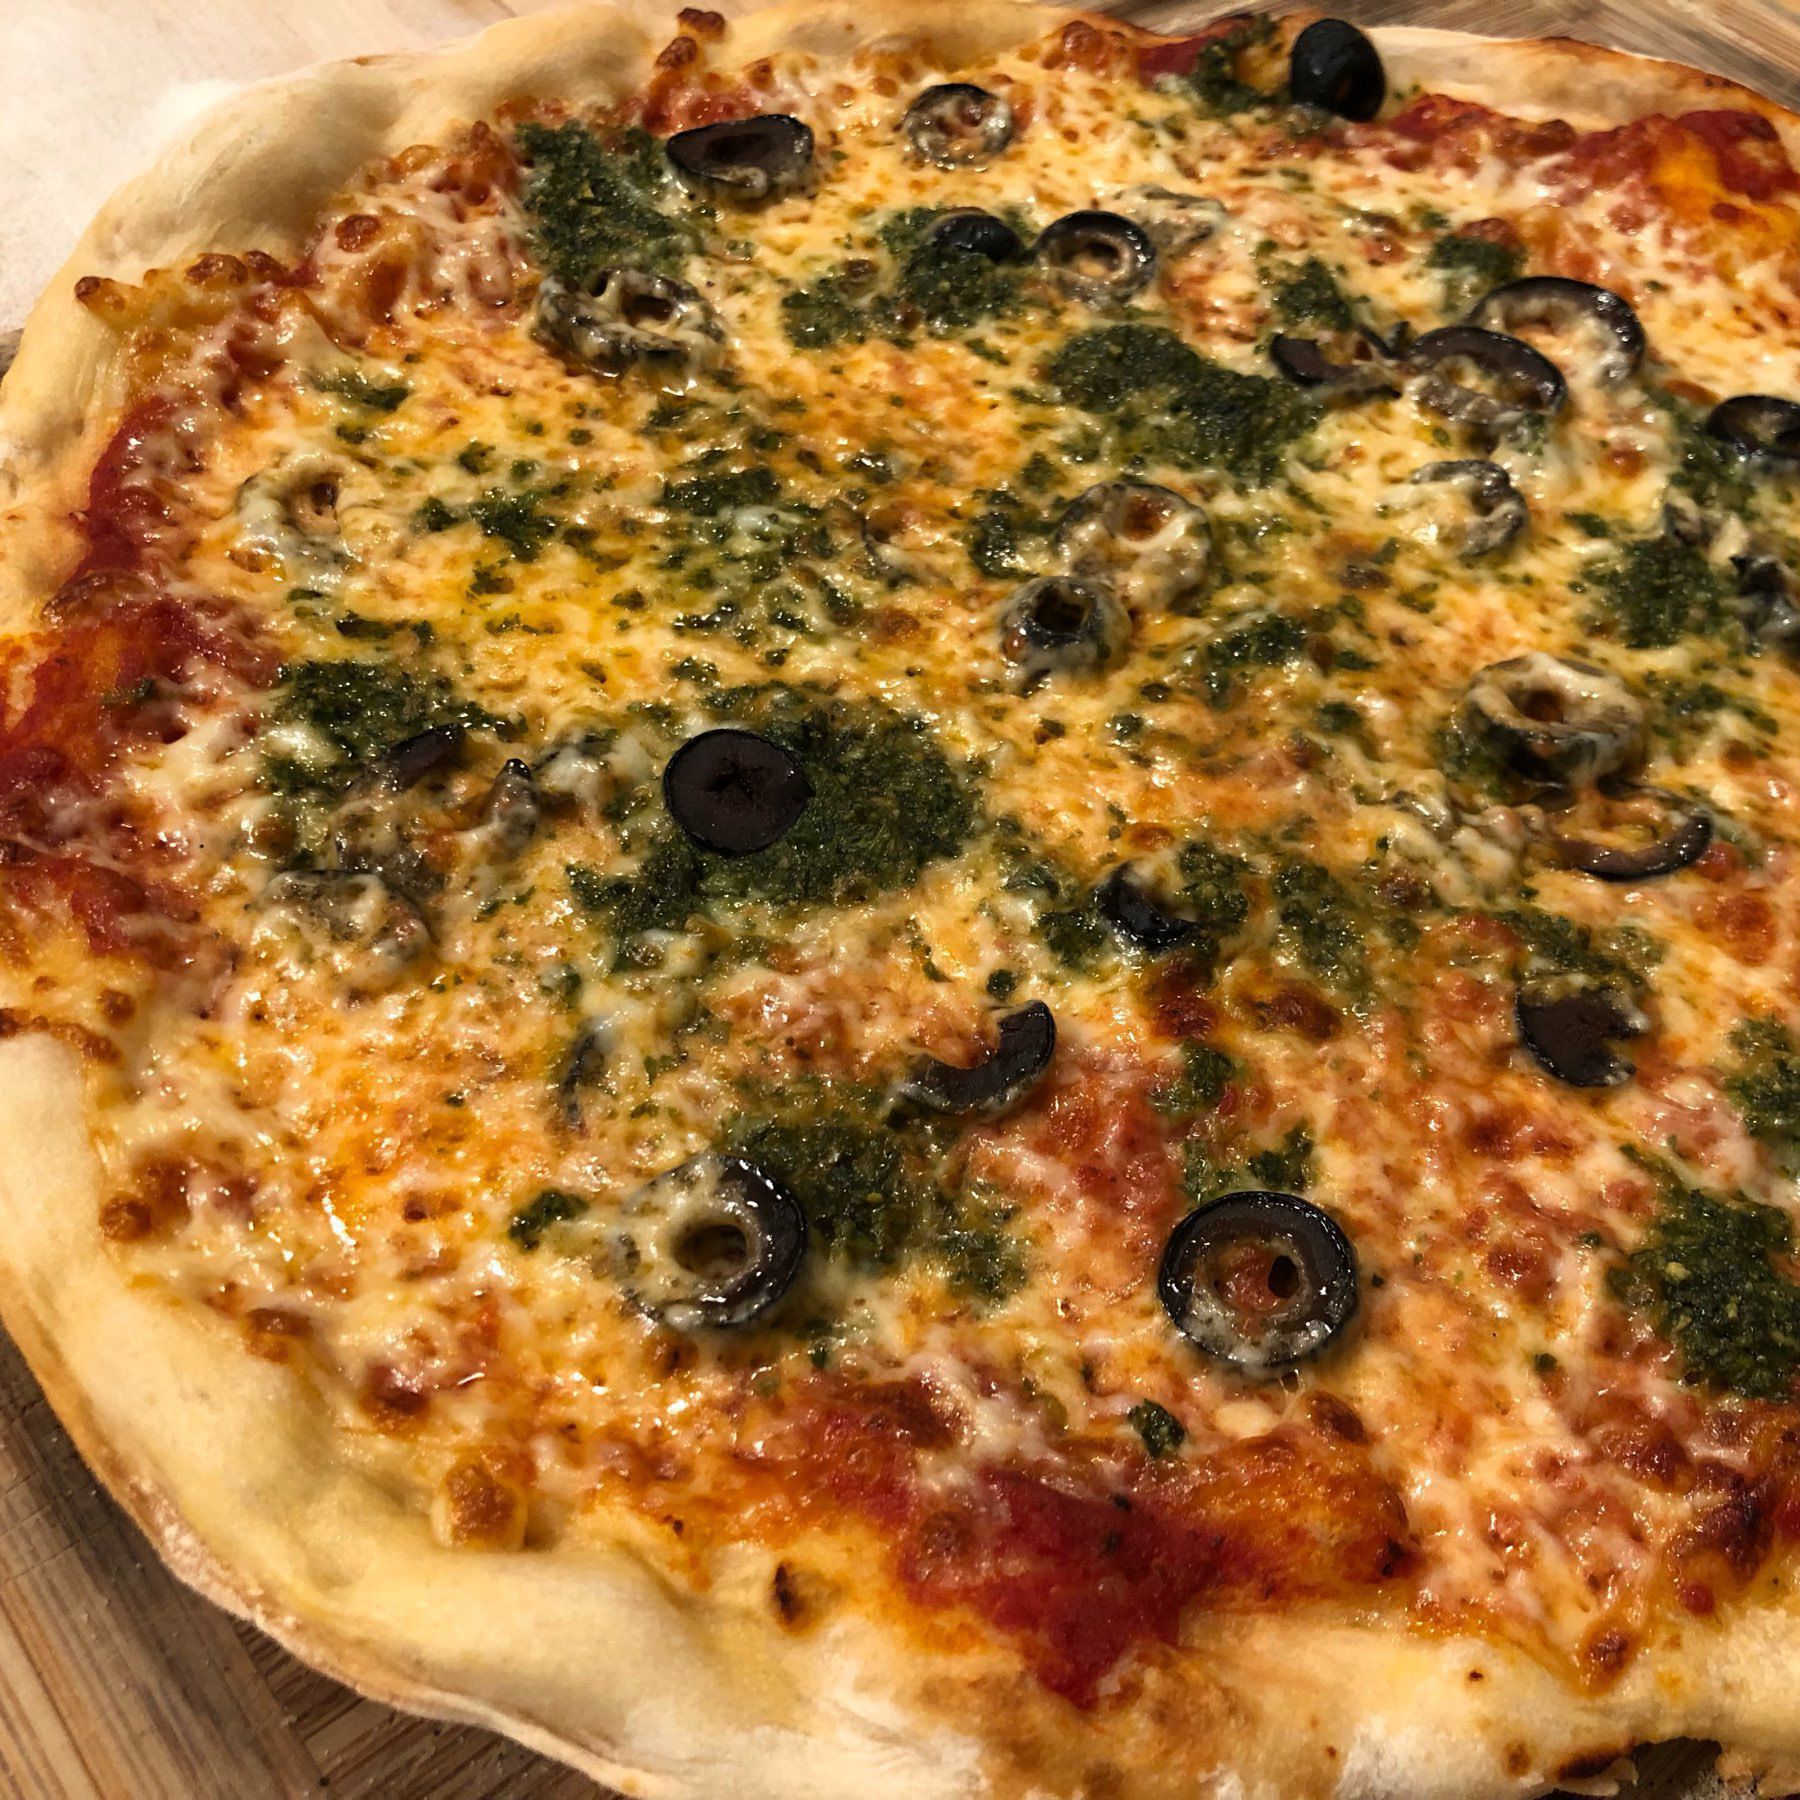 Close-up of a pizza with red sauce, cheese, black olives and pesto.